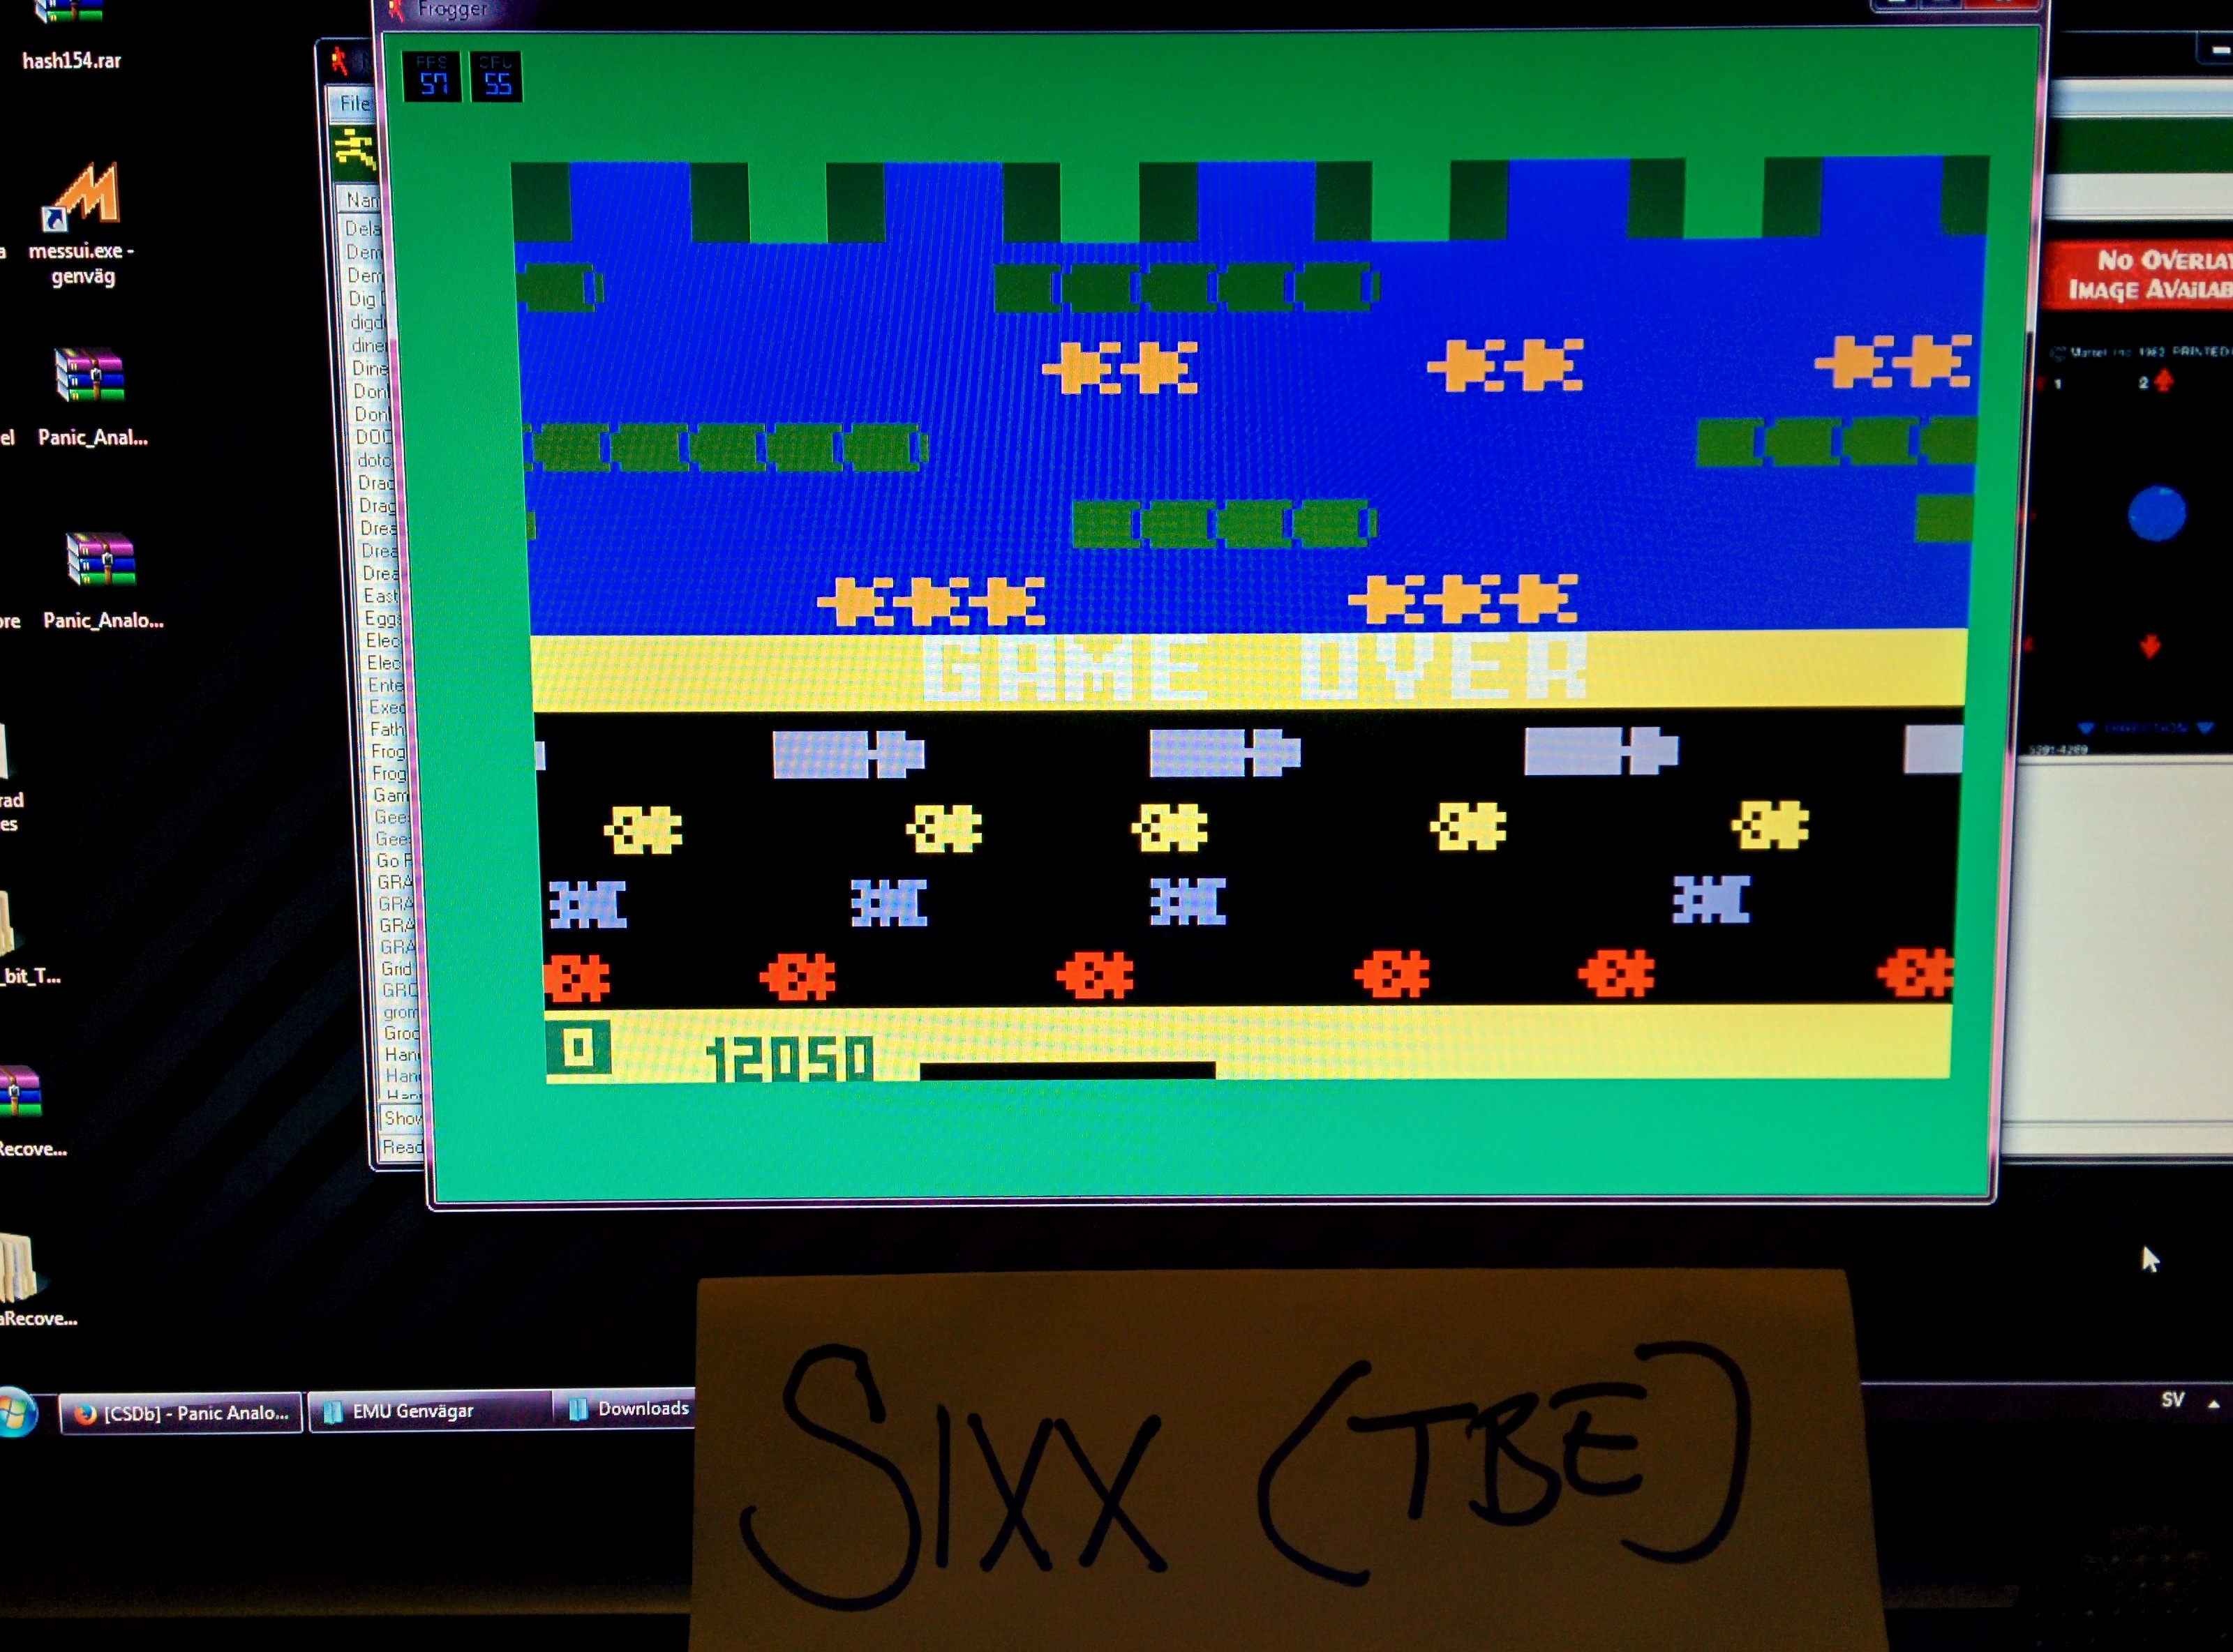 Sixx: Frogger: Skill 1 (Intellivision Emulated) 12,050 points on 2014-08-11 14:50:02